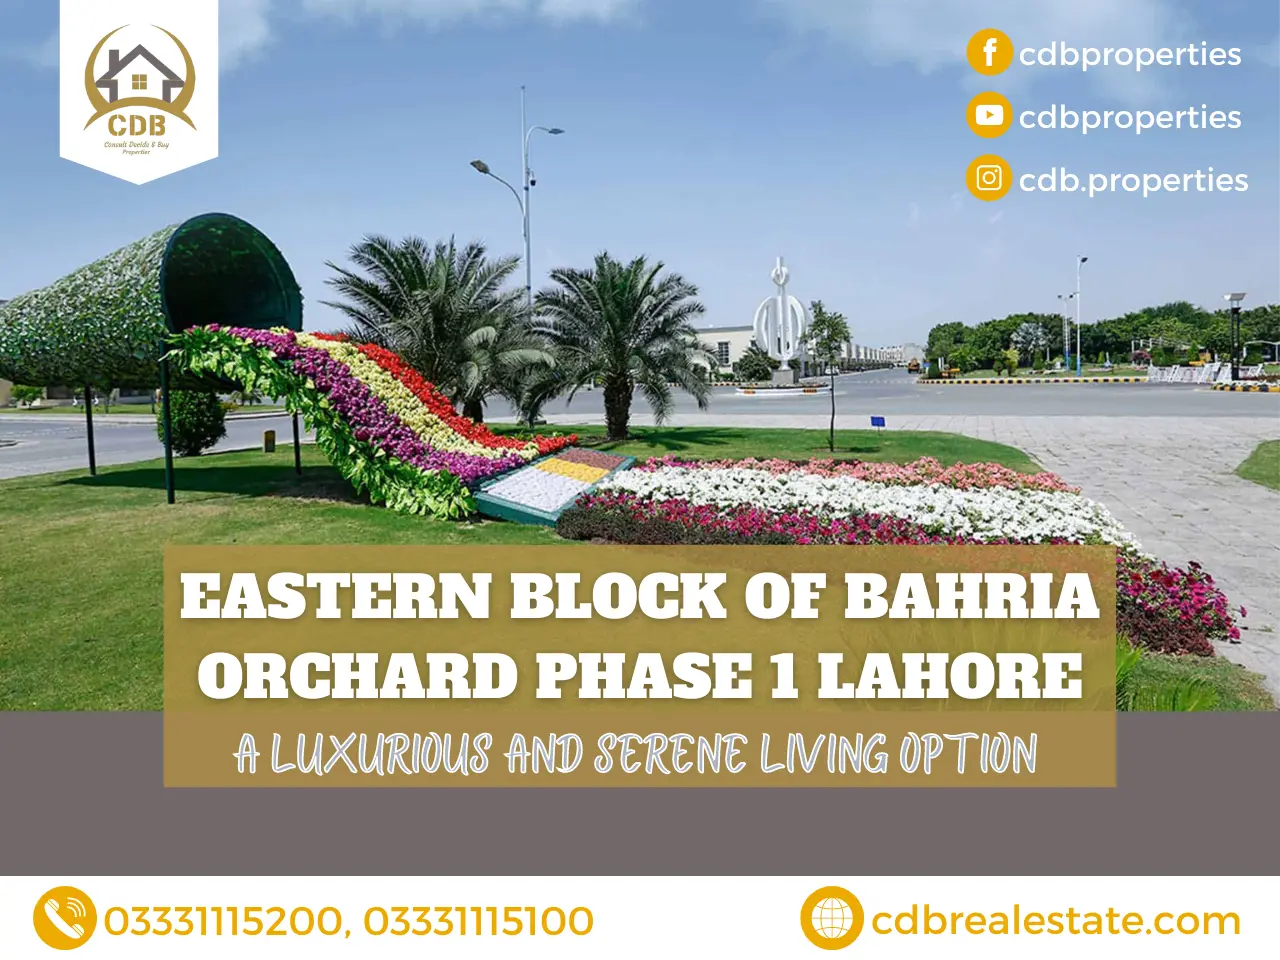 Eastern Block of Bahria Orchard Phase 1 Lahore